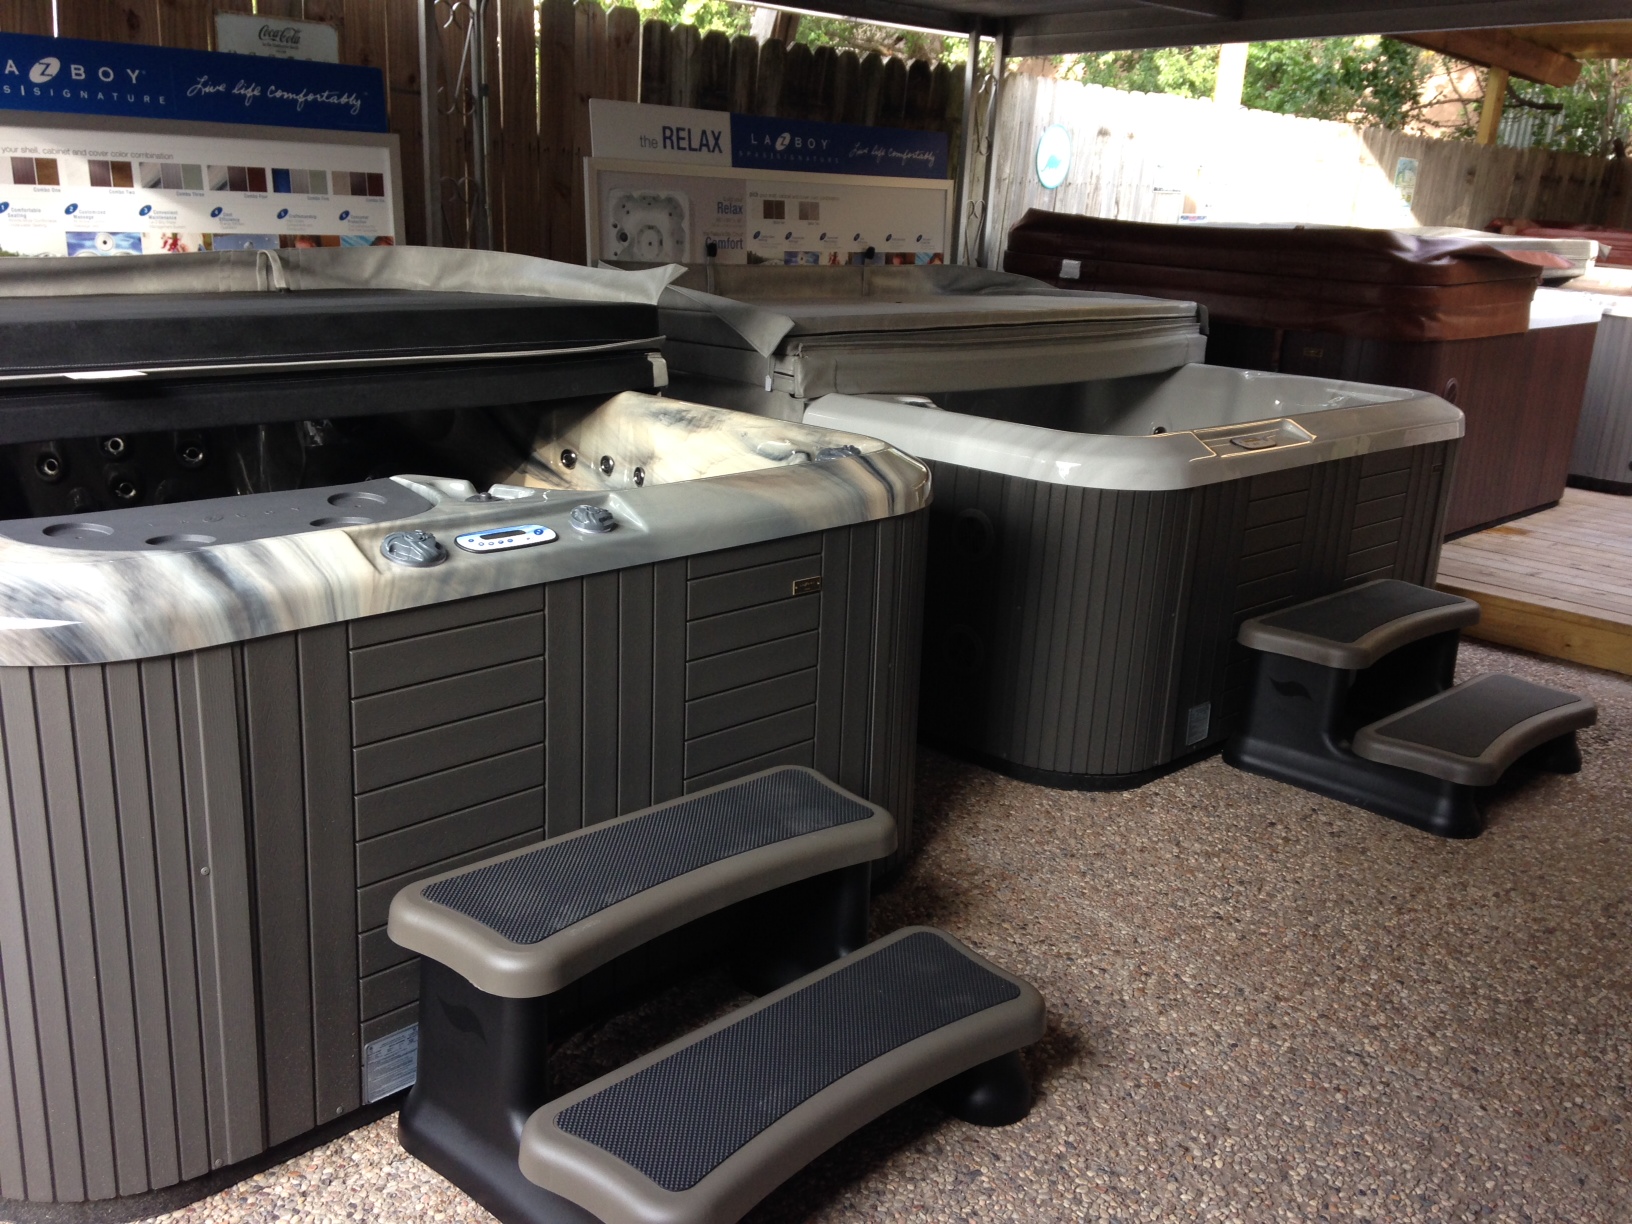 La-Z-Boy Hot Tubs in stock and ready for delivery.